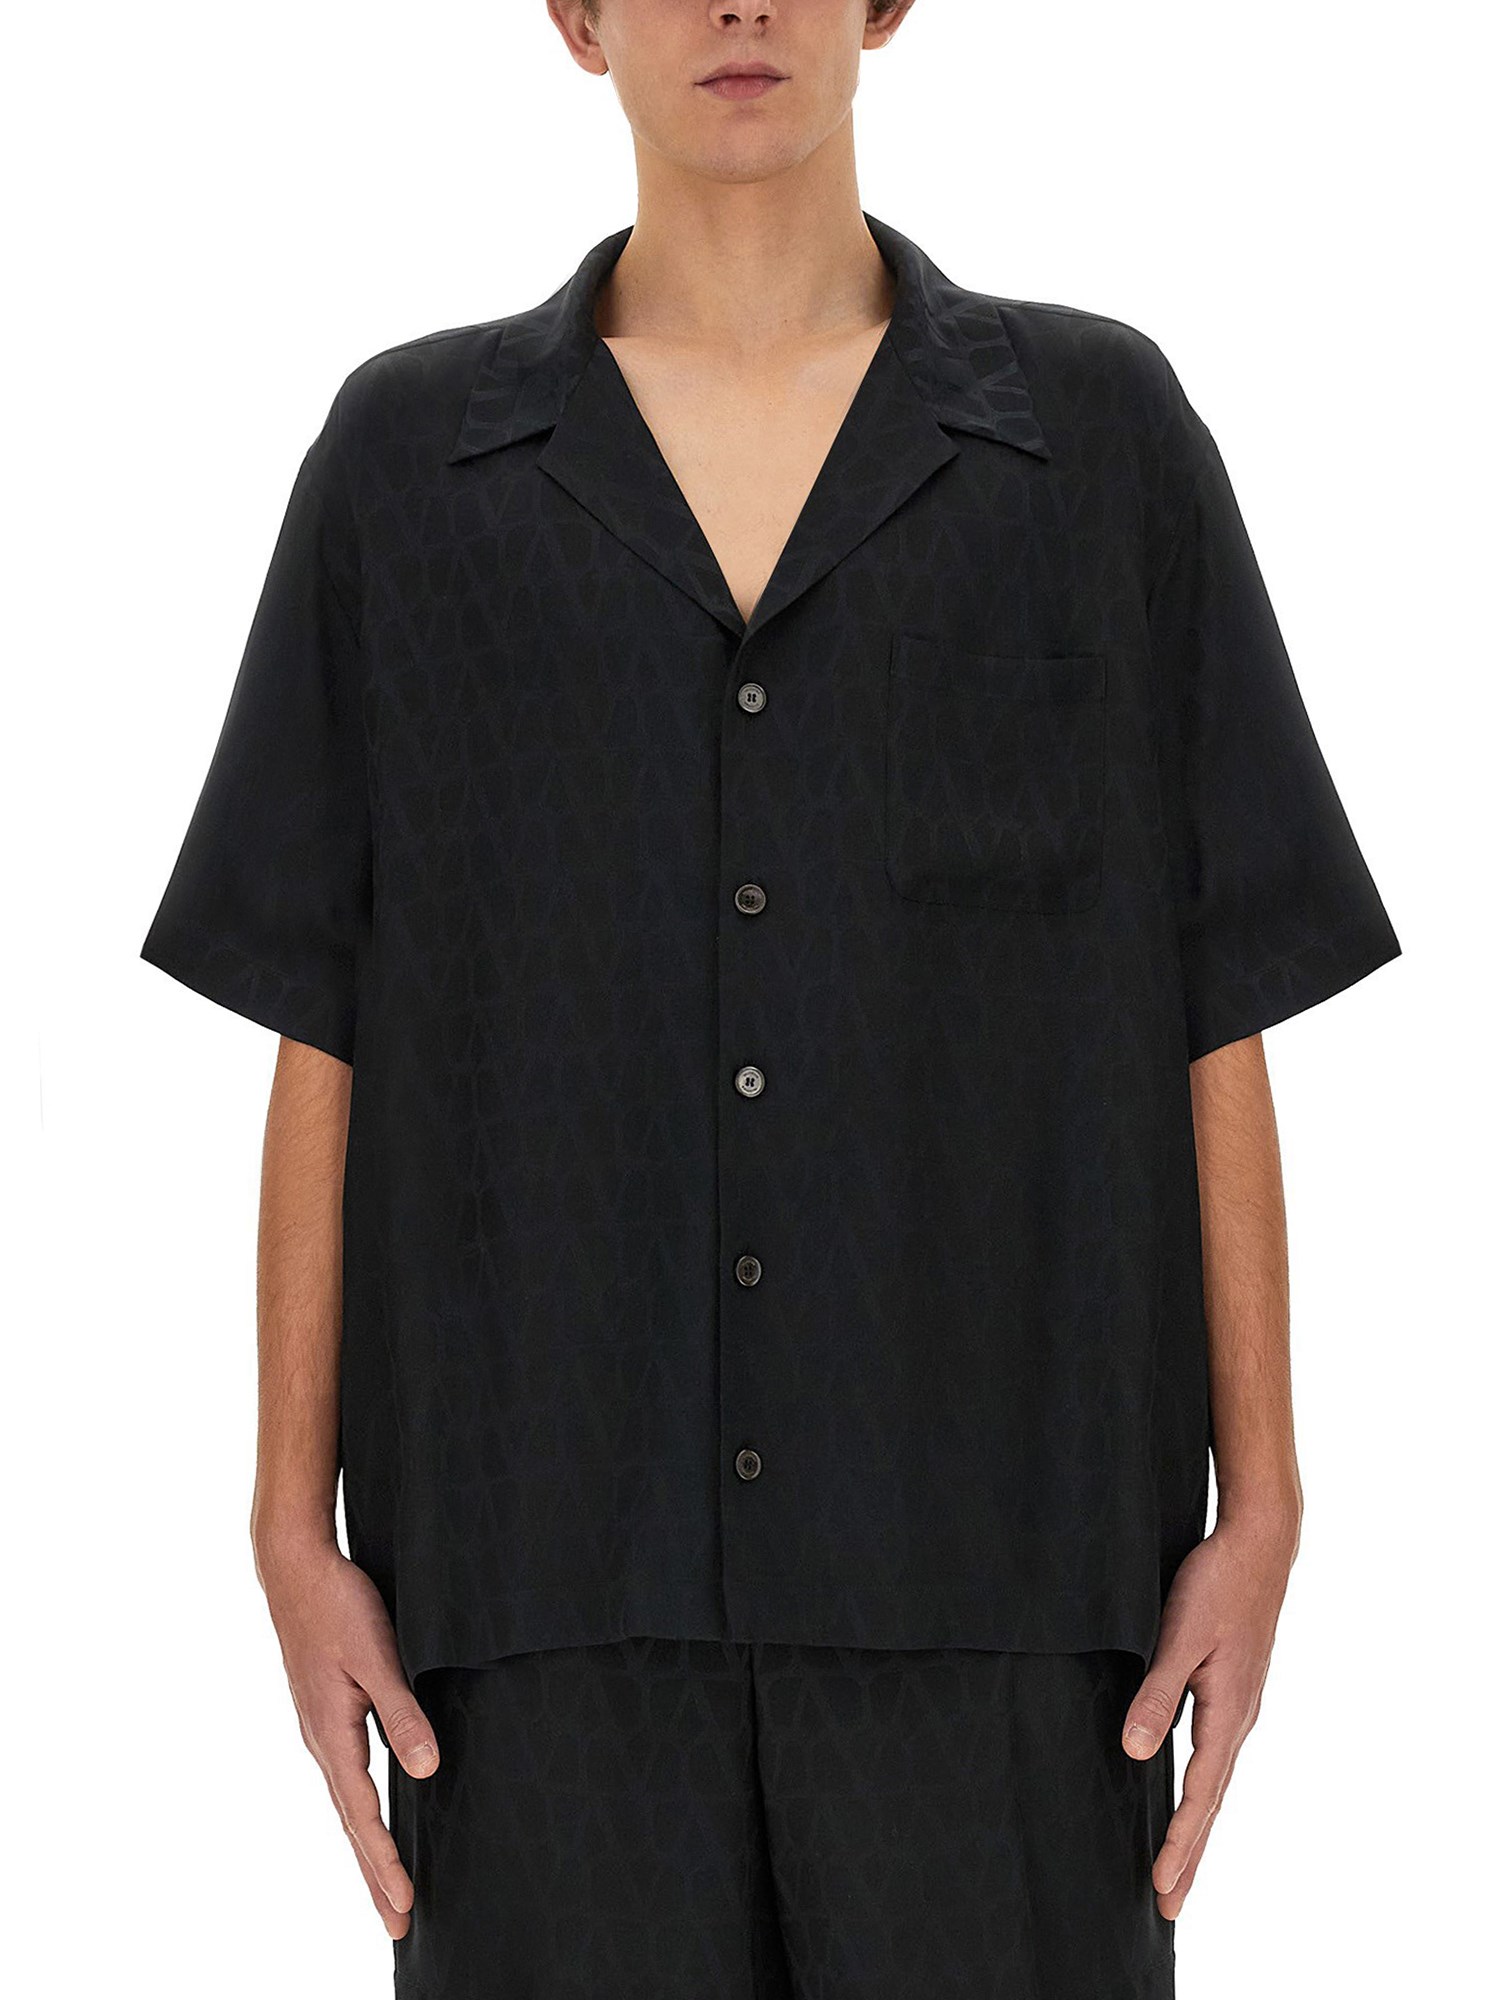 valentino bowling shirt with iconographe toile pattern